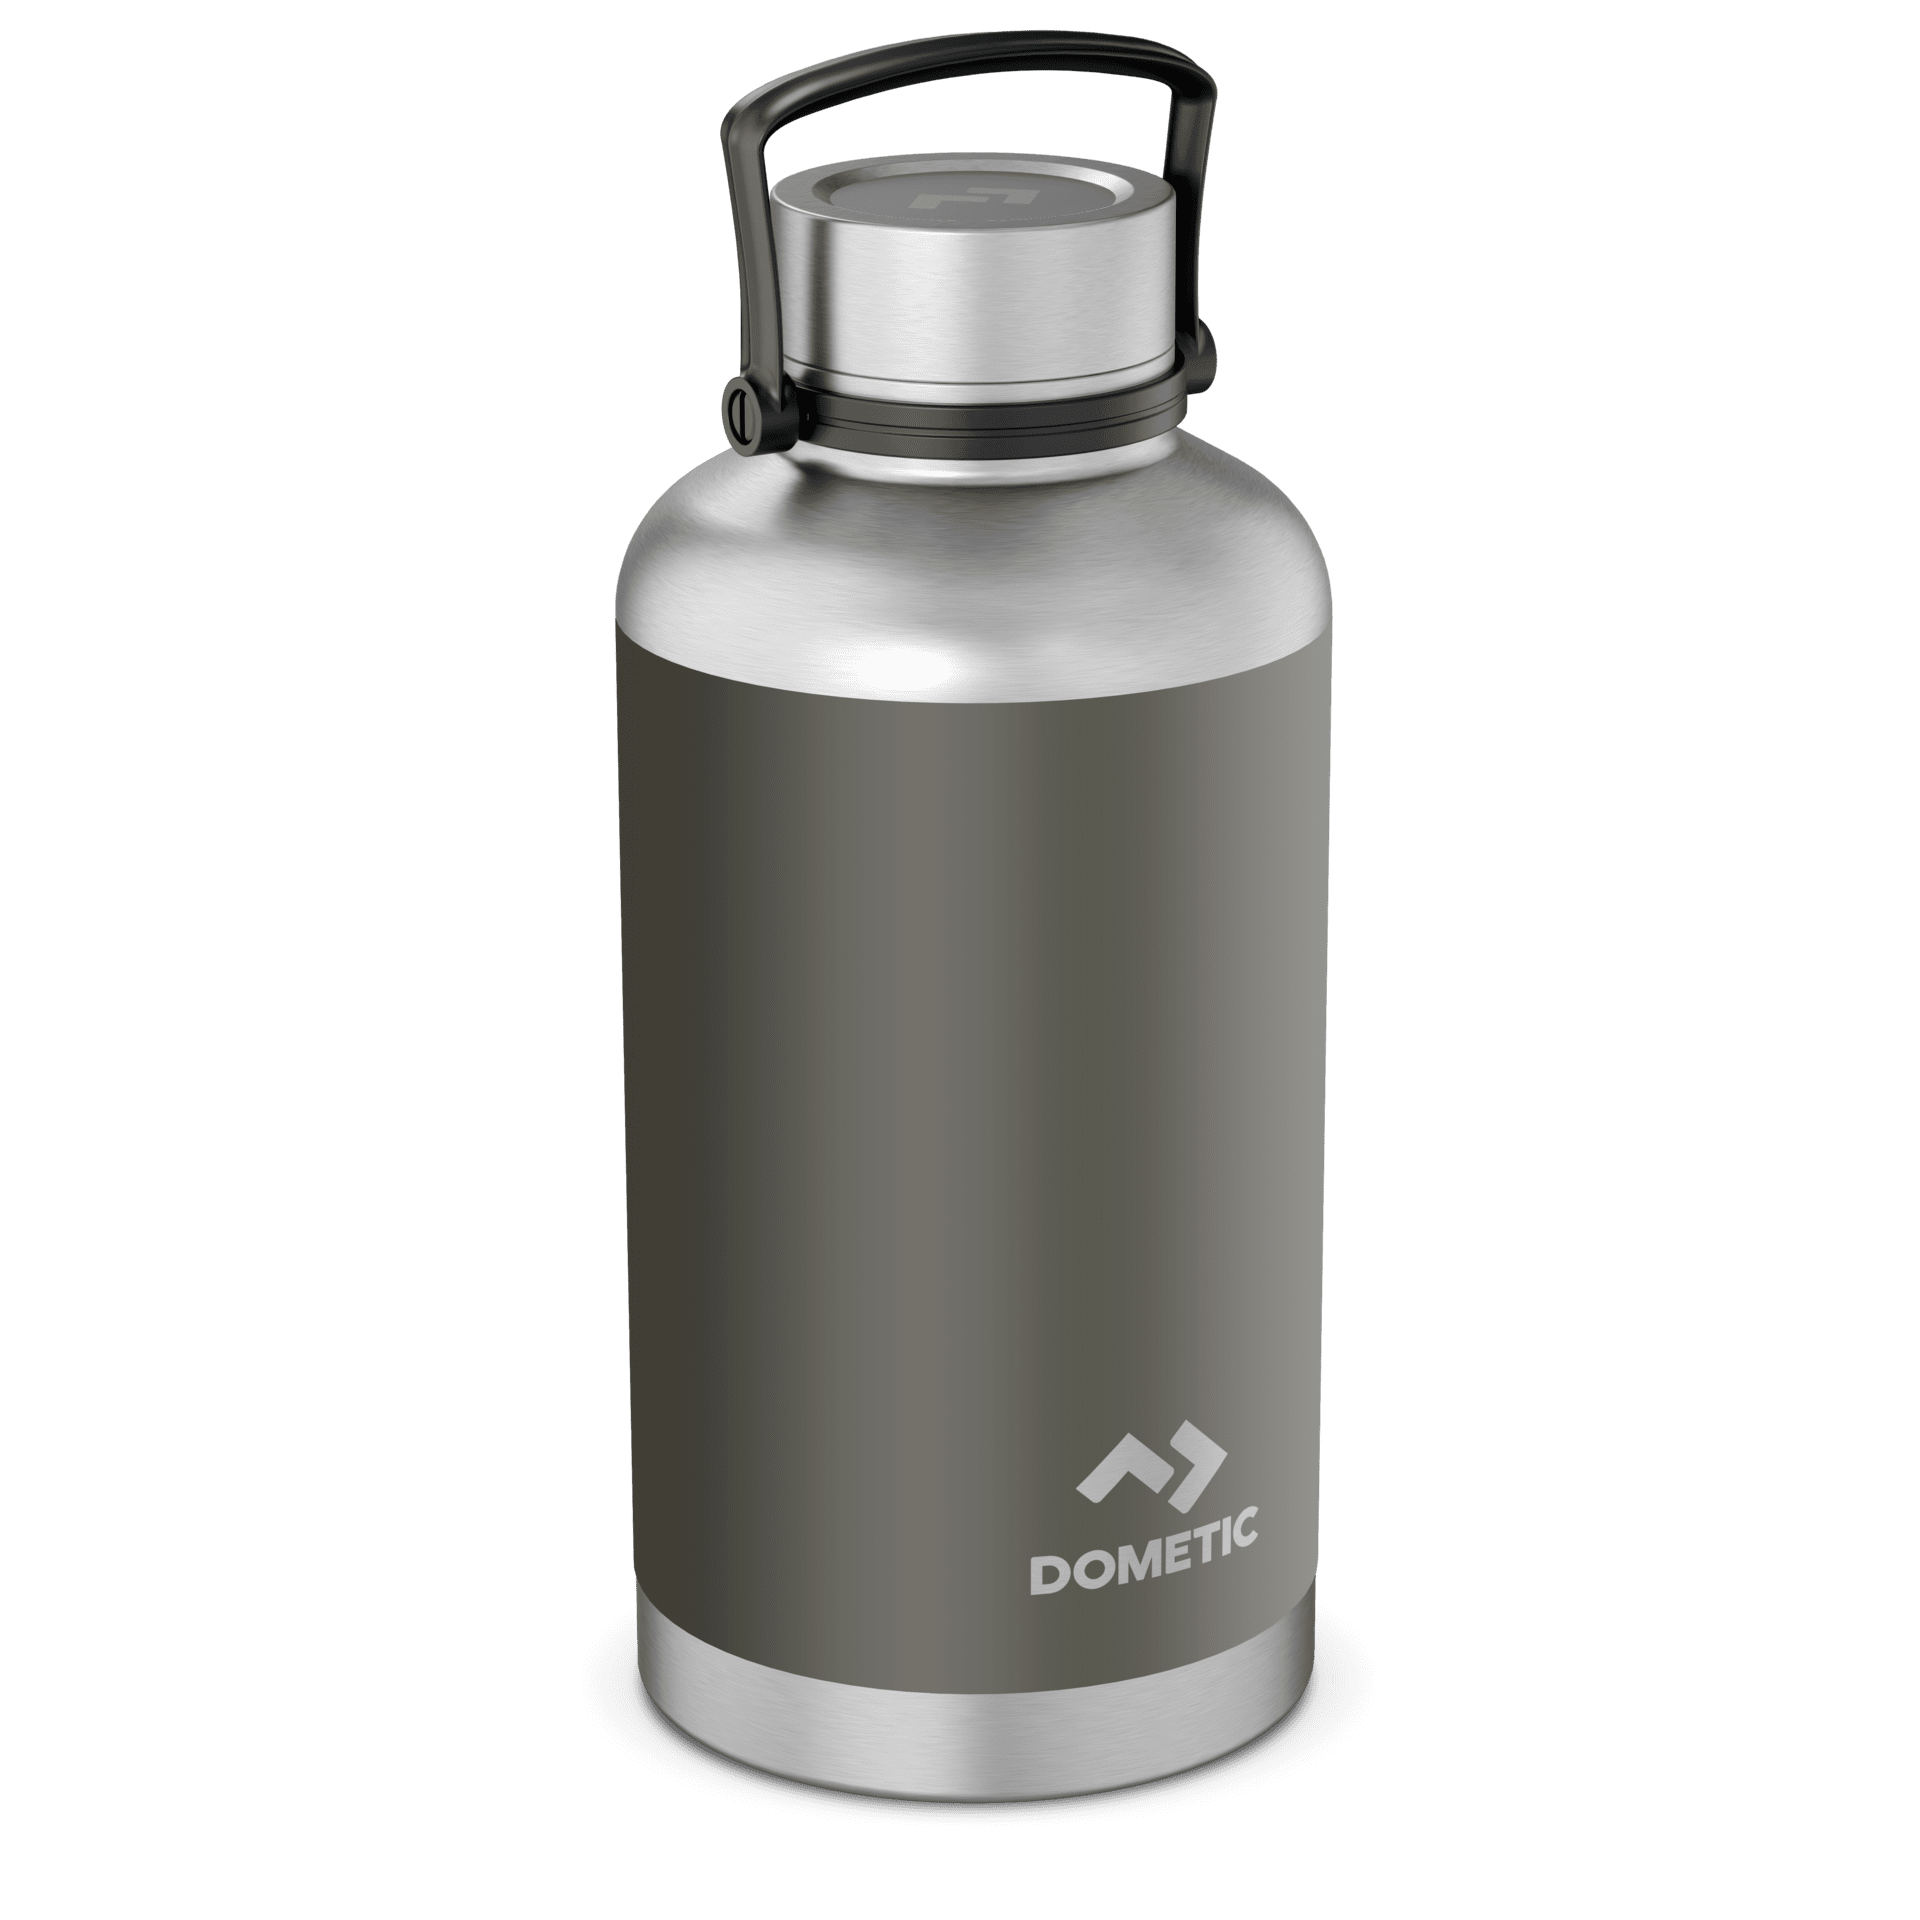 https://www.dometic.com/externalassets/dometic-thermo-bottle-192_9600050948_82906.png?ref=2100725689